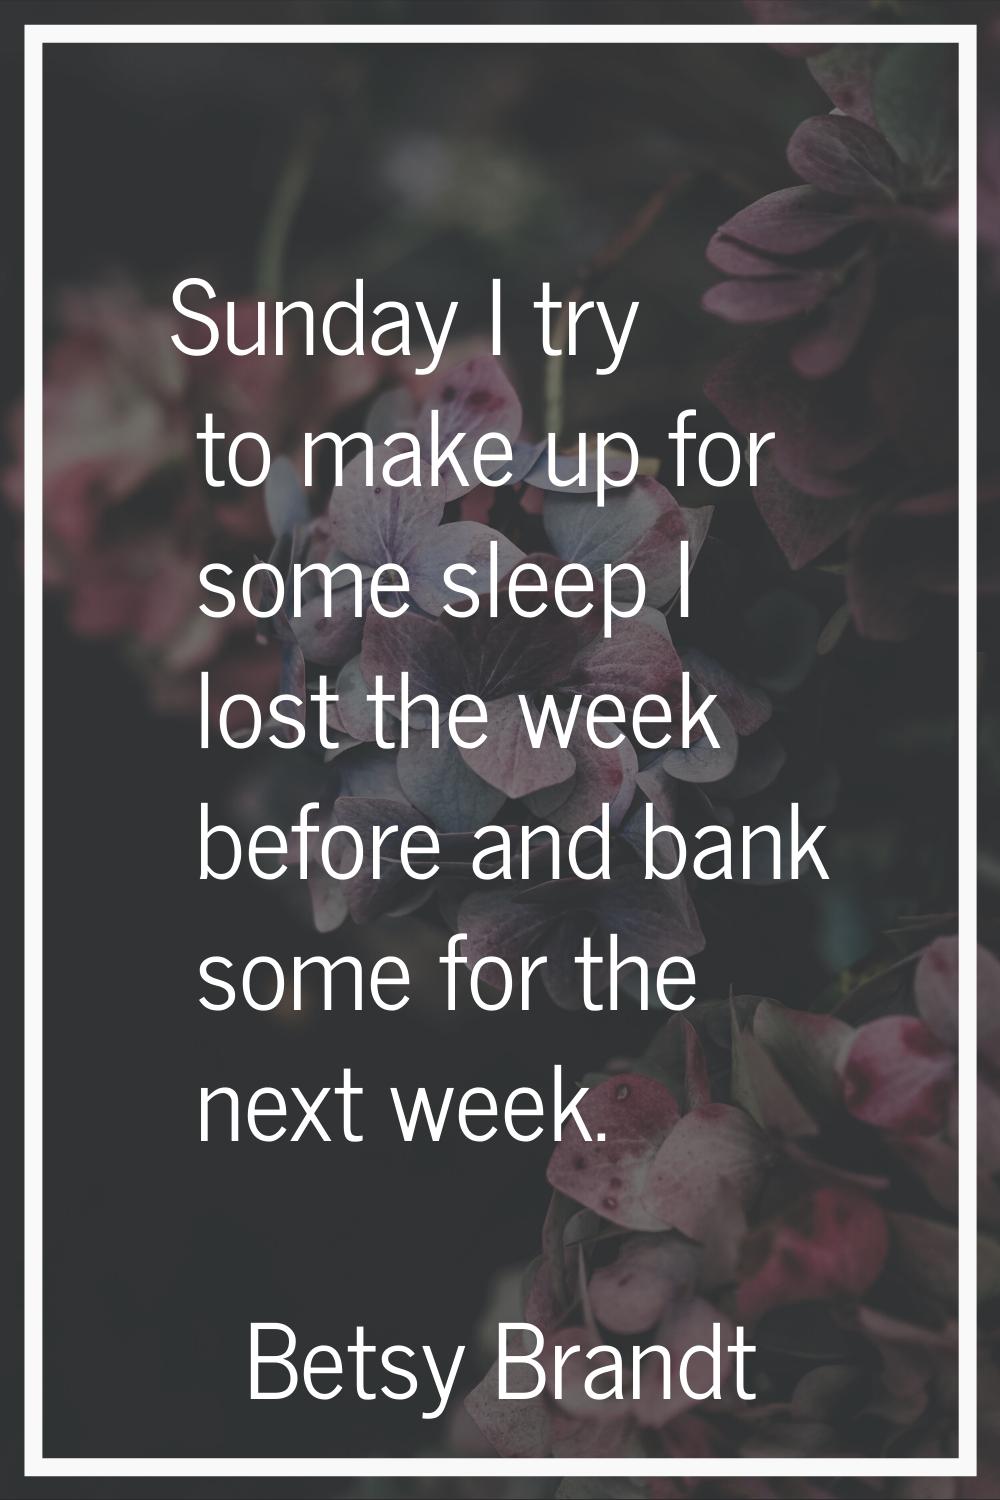 Sunday I try to make up for some sleep I lost the week before and bank some for the next week.